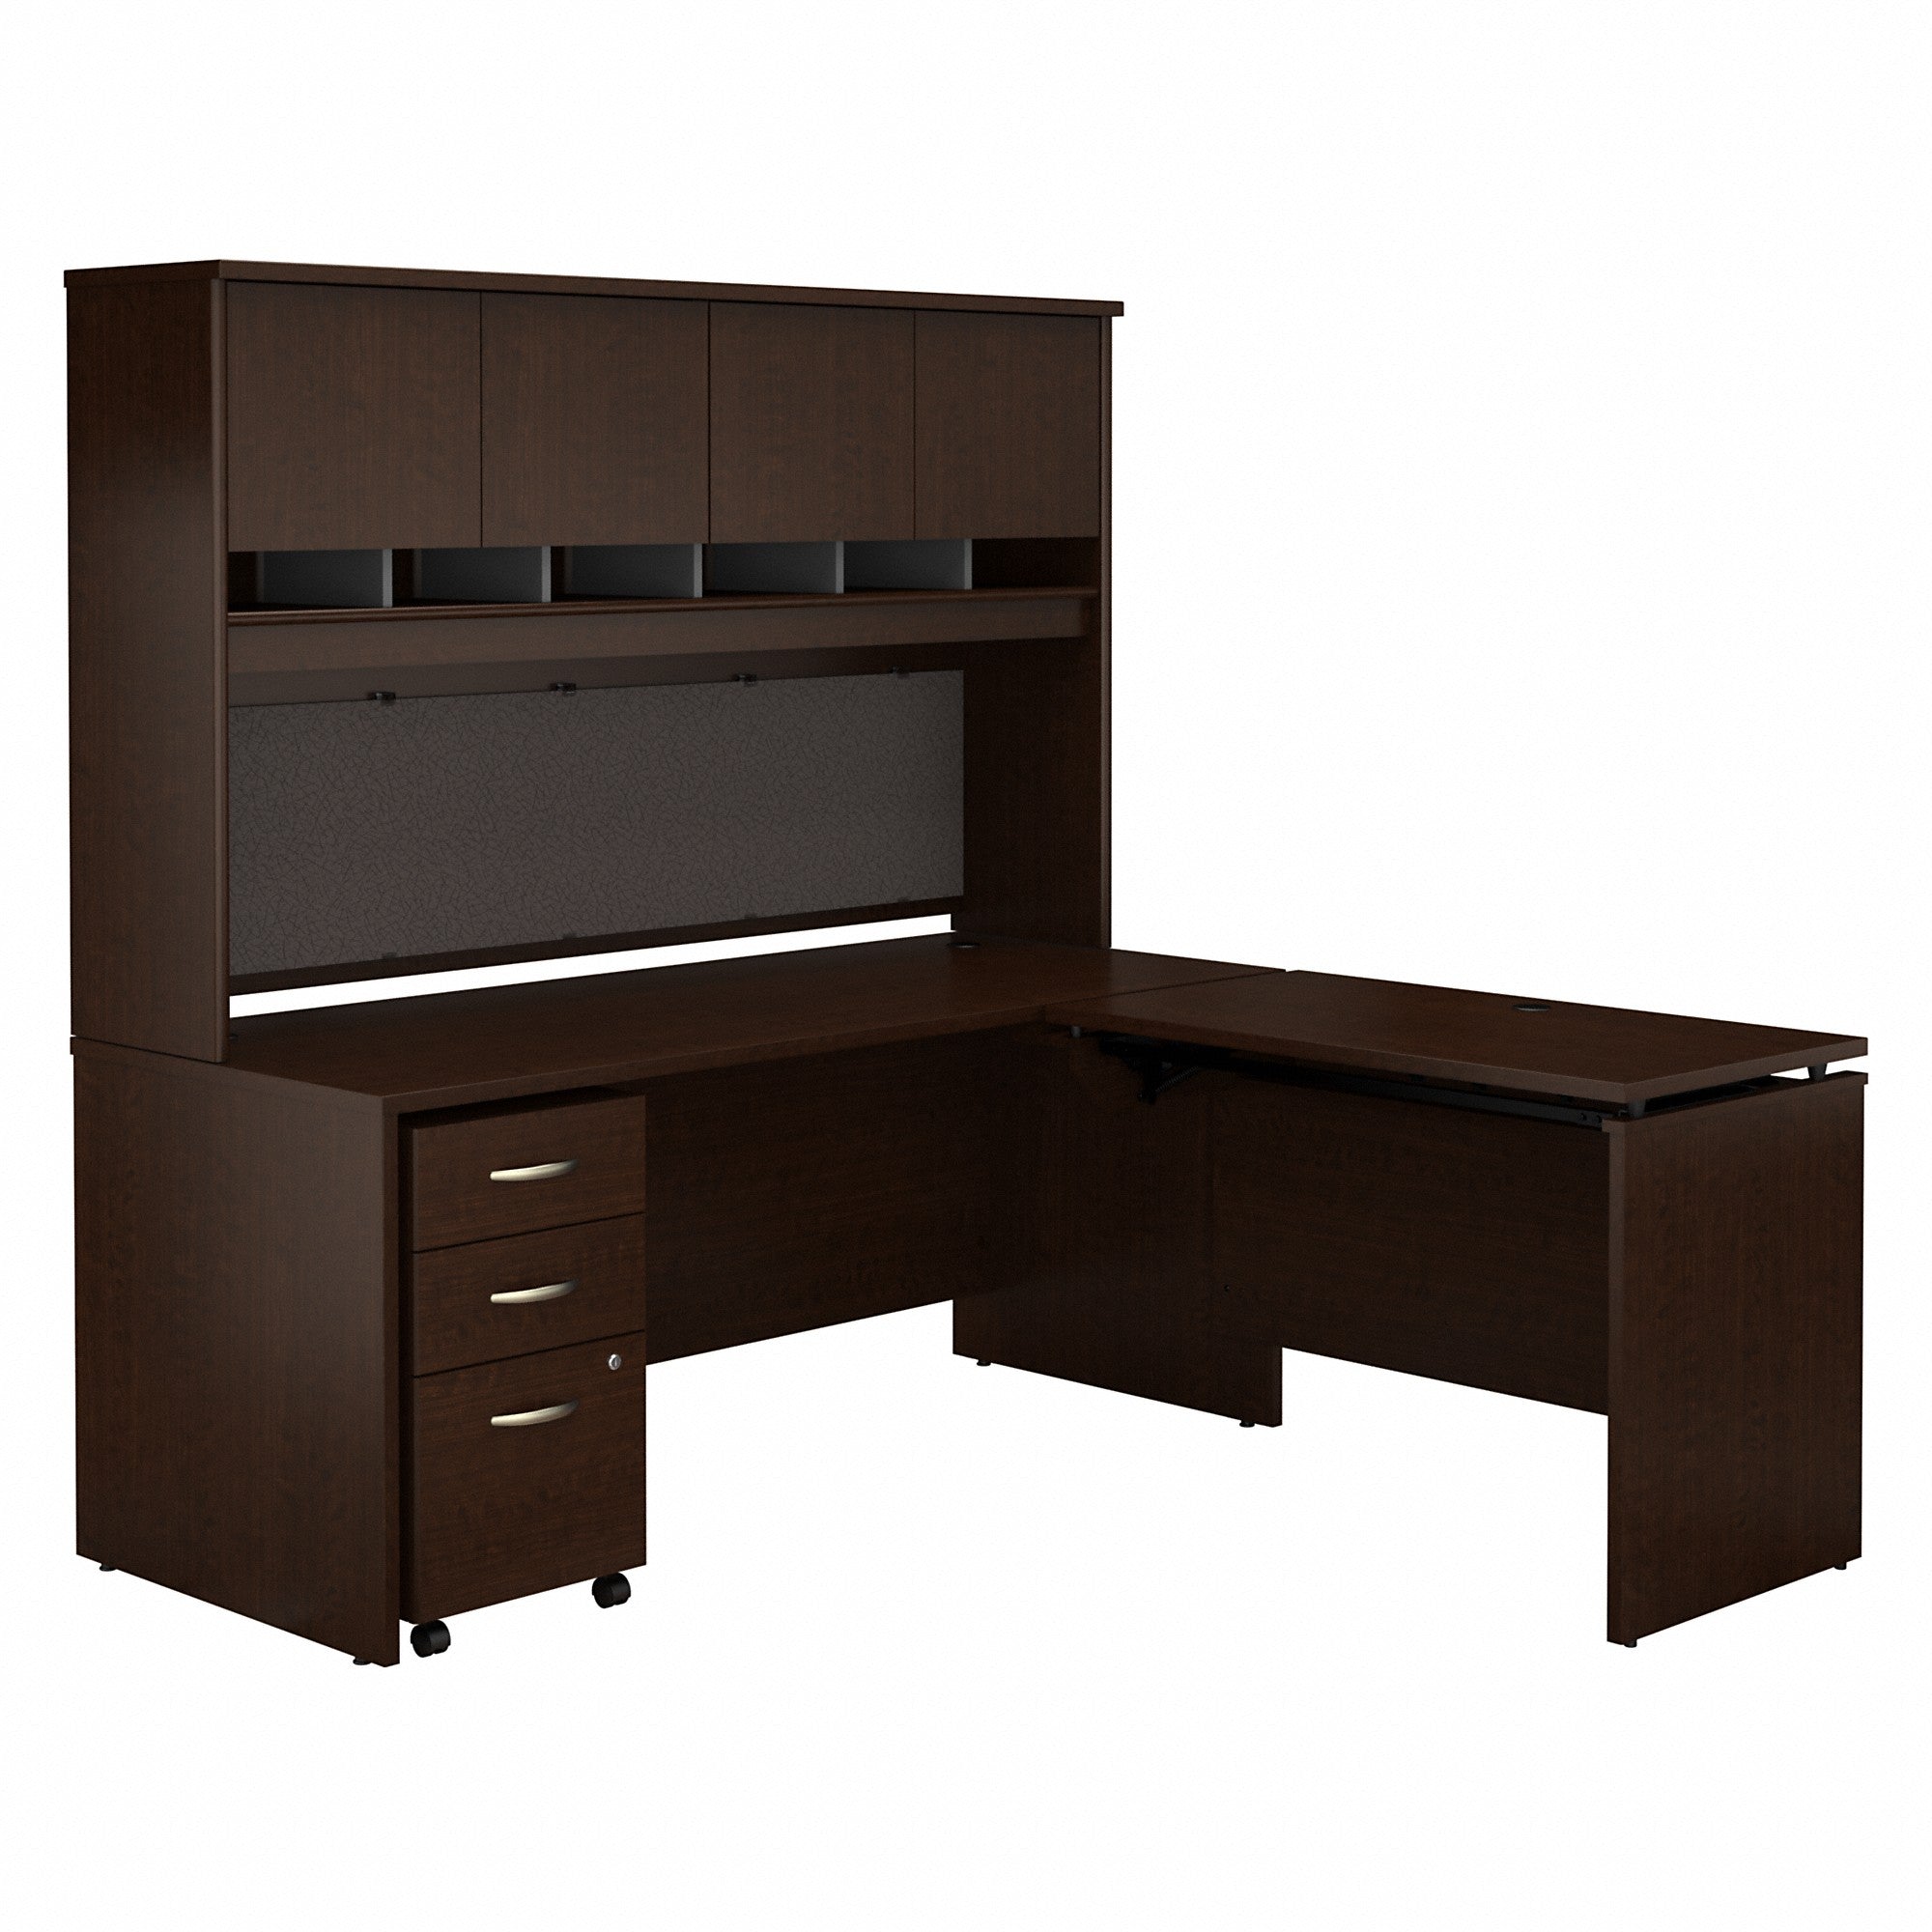 Bush Business Furniture Series C 72W x 30D 3 Position Sit to Stand L Shaped Desk with Hutch and Mobile File Cabinet